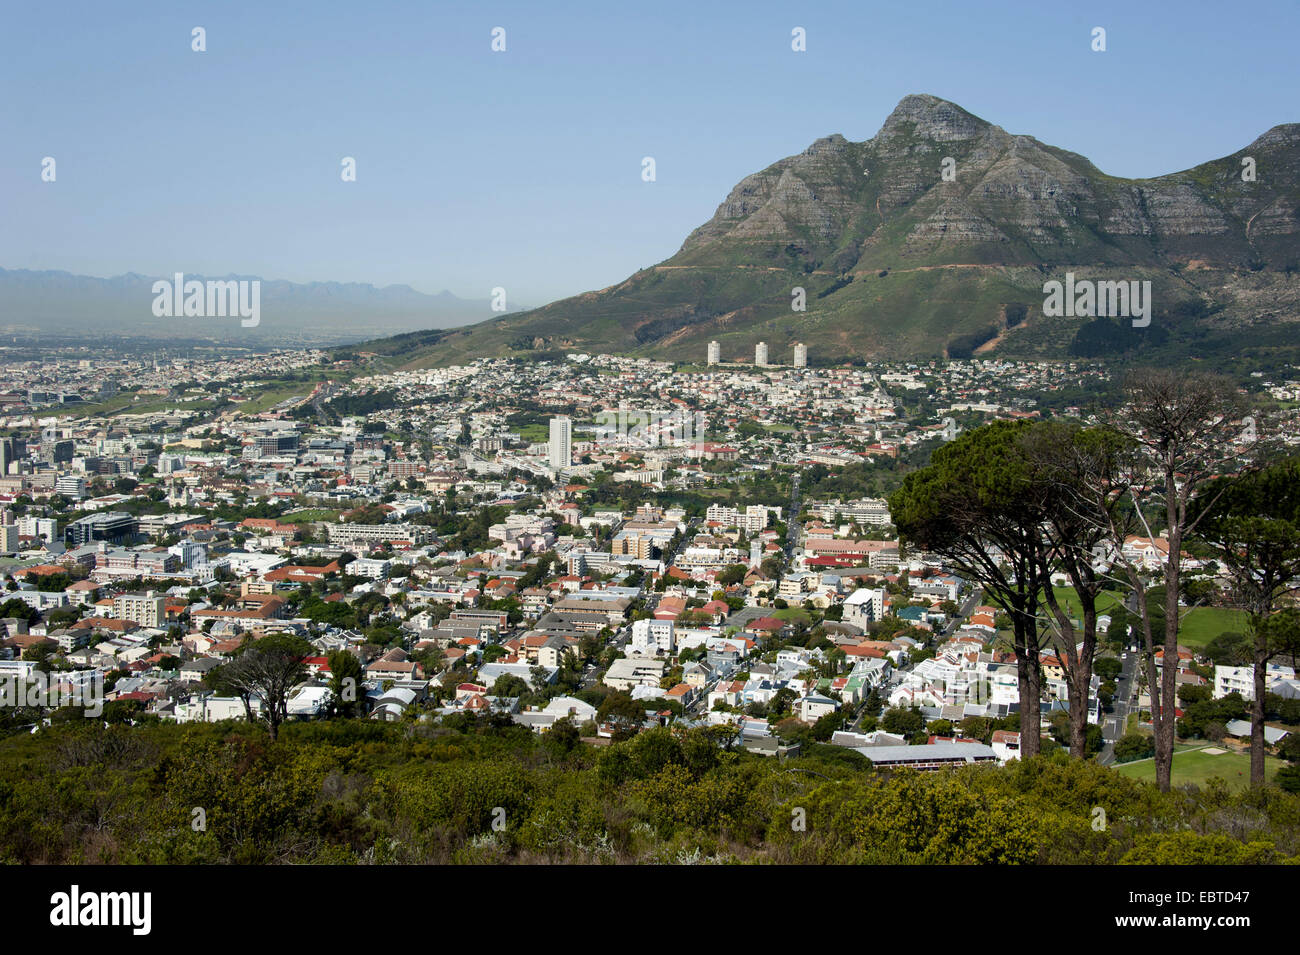 view over the sea of houses of the metropolis, South Africa, Western Cape, Capetown Stock Photo